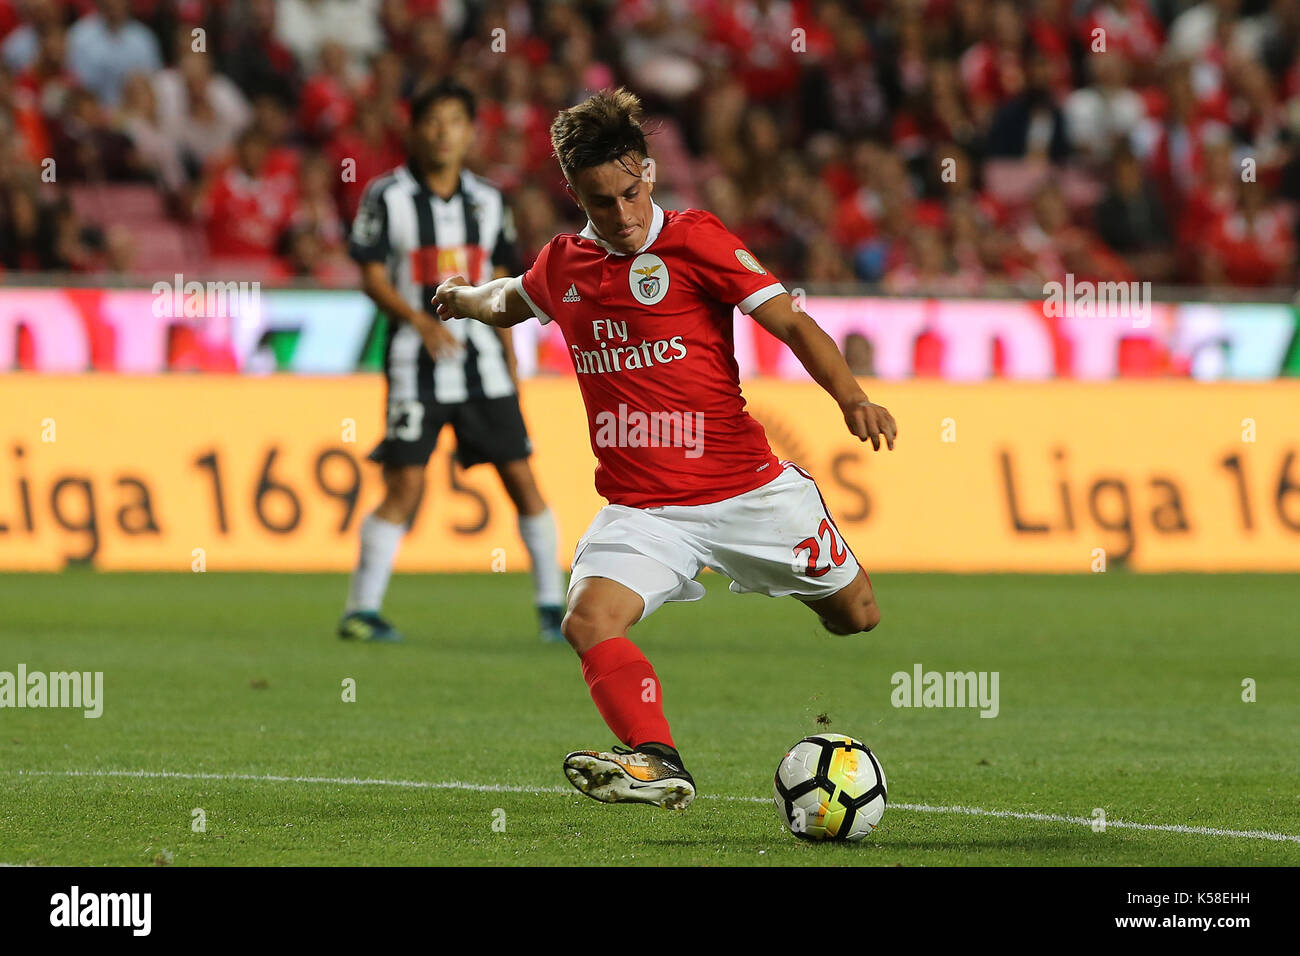 Benfica«s forward Franco Cervi from Argentina during the Premier League 2017/18 match between SL Benfica v Portimonense SC, at Luz Stadium in Lisbon on September 8, 2017. (Photo by Bruno Barros / DPI) Stock Photo